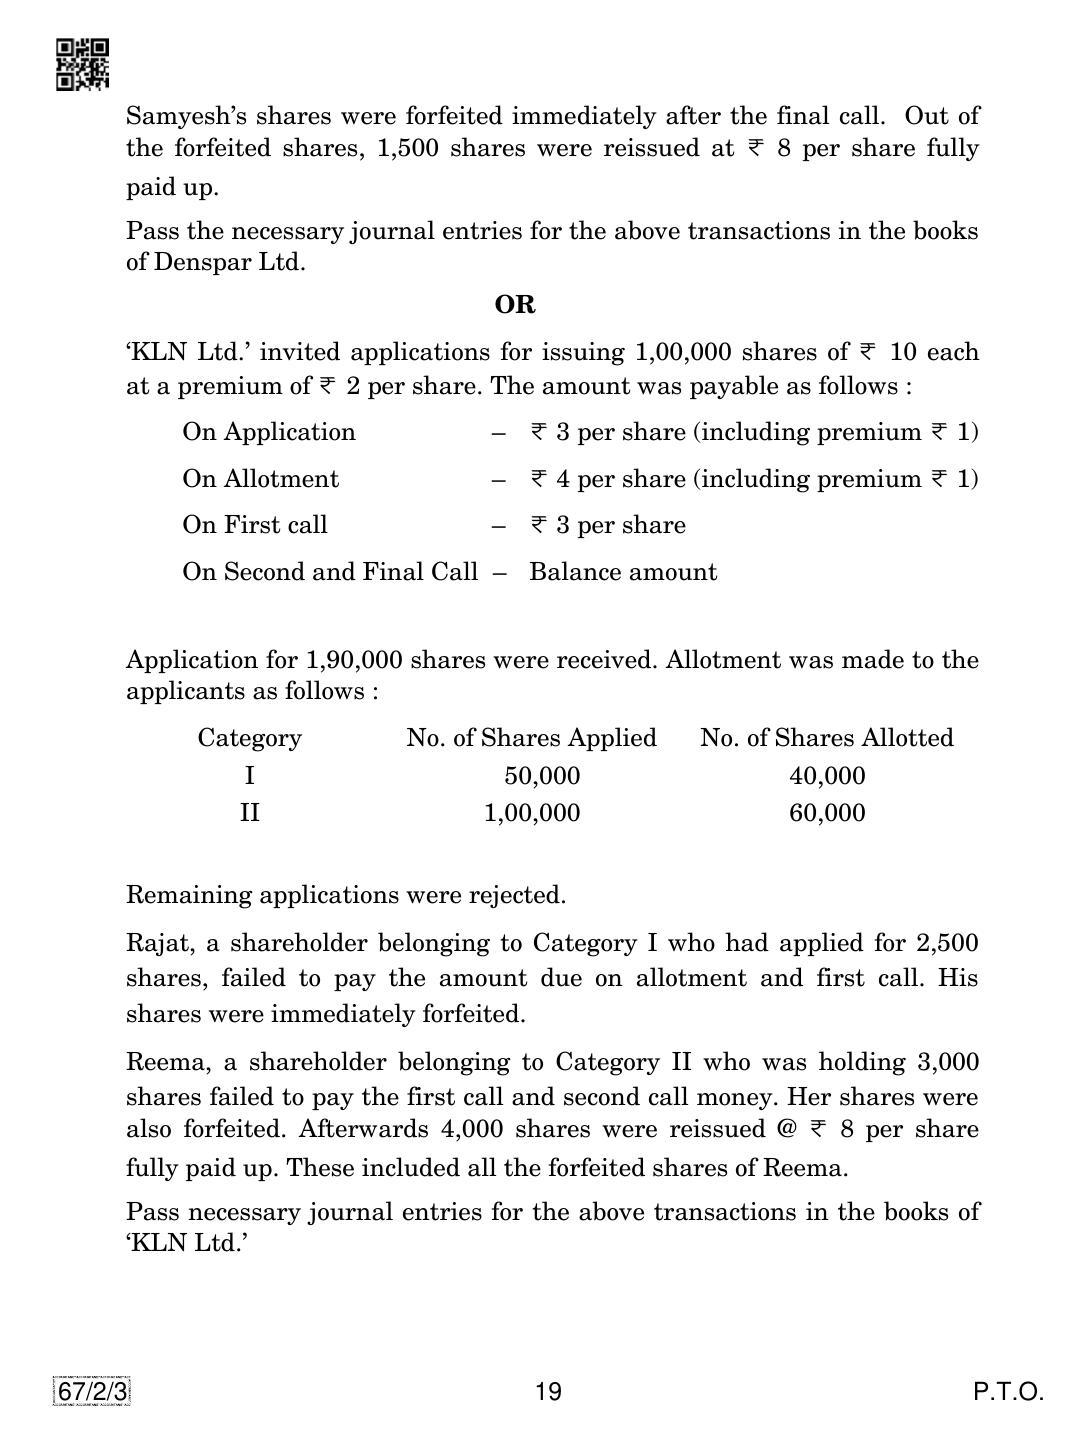 CBSE Class 12 67-2-3 Accountancy 2019 Question Paper - Page 19